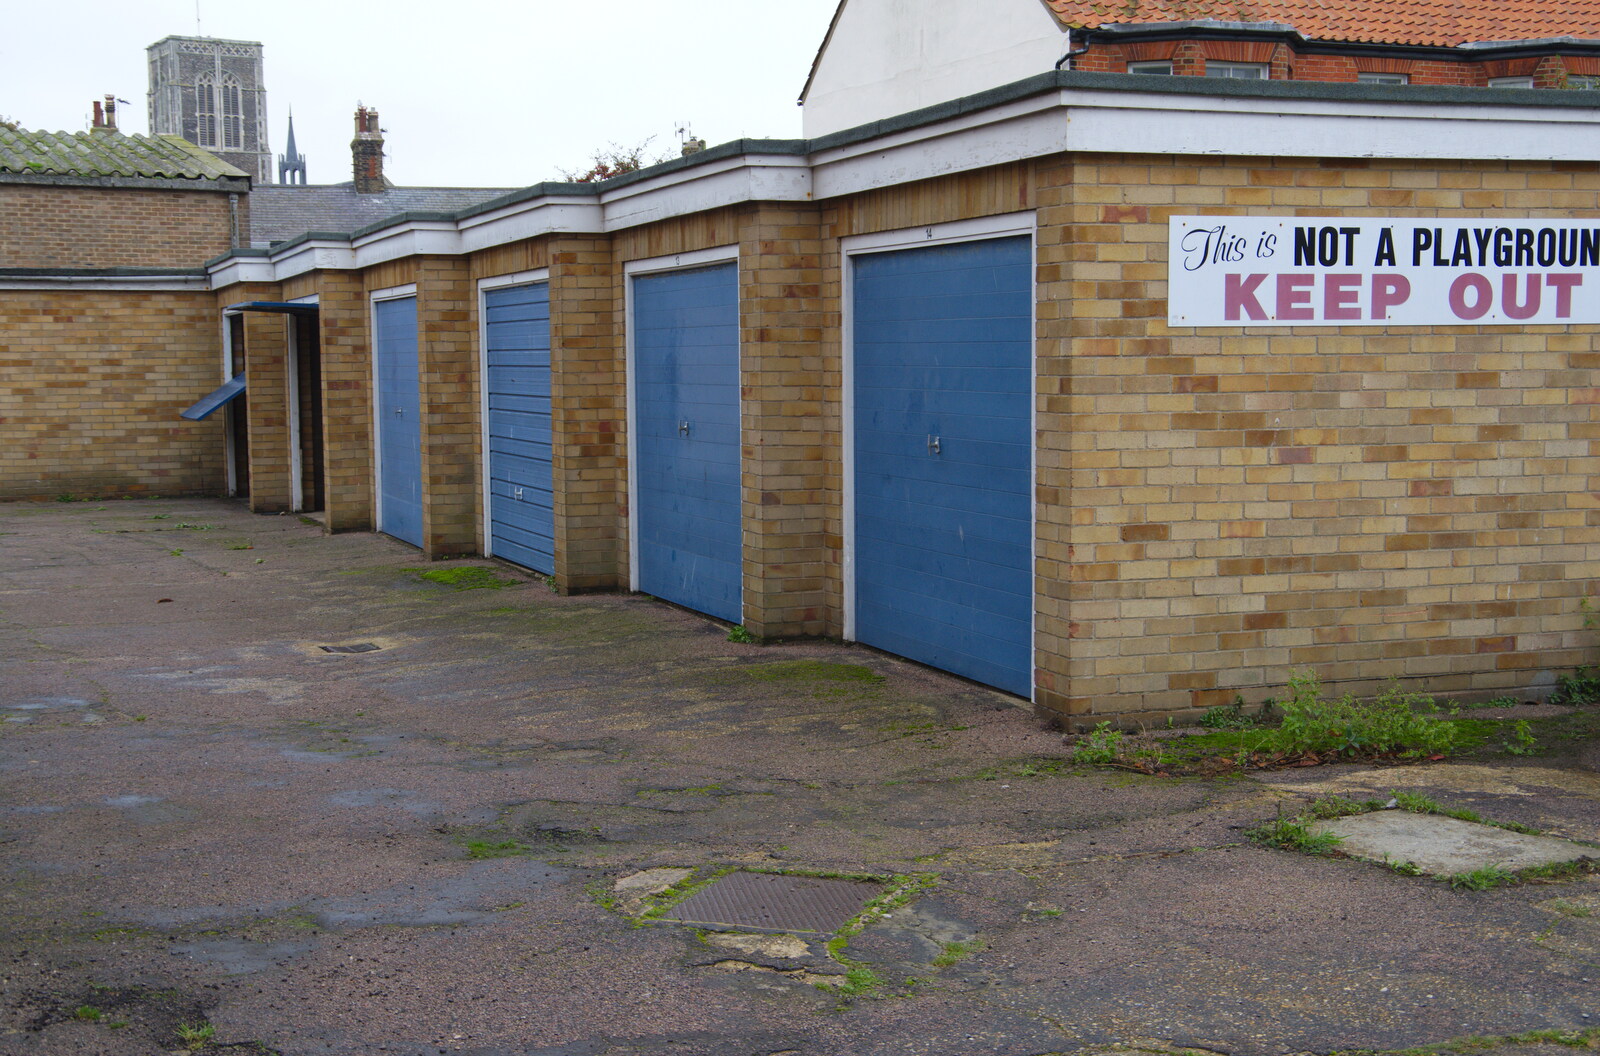 A bunch of semi-derelict lock-up garages from A Night at the Crown Hotel, Southwold, Suffolk - 8th November 2019